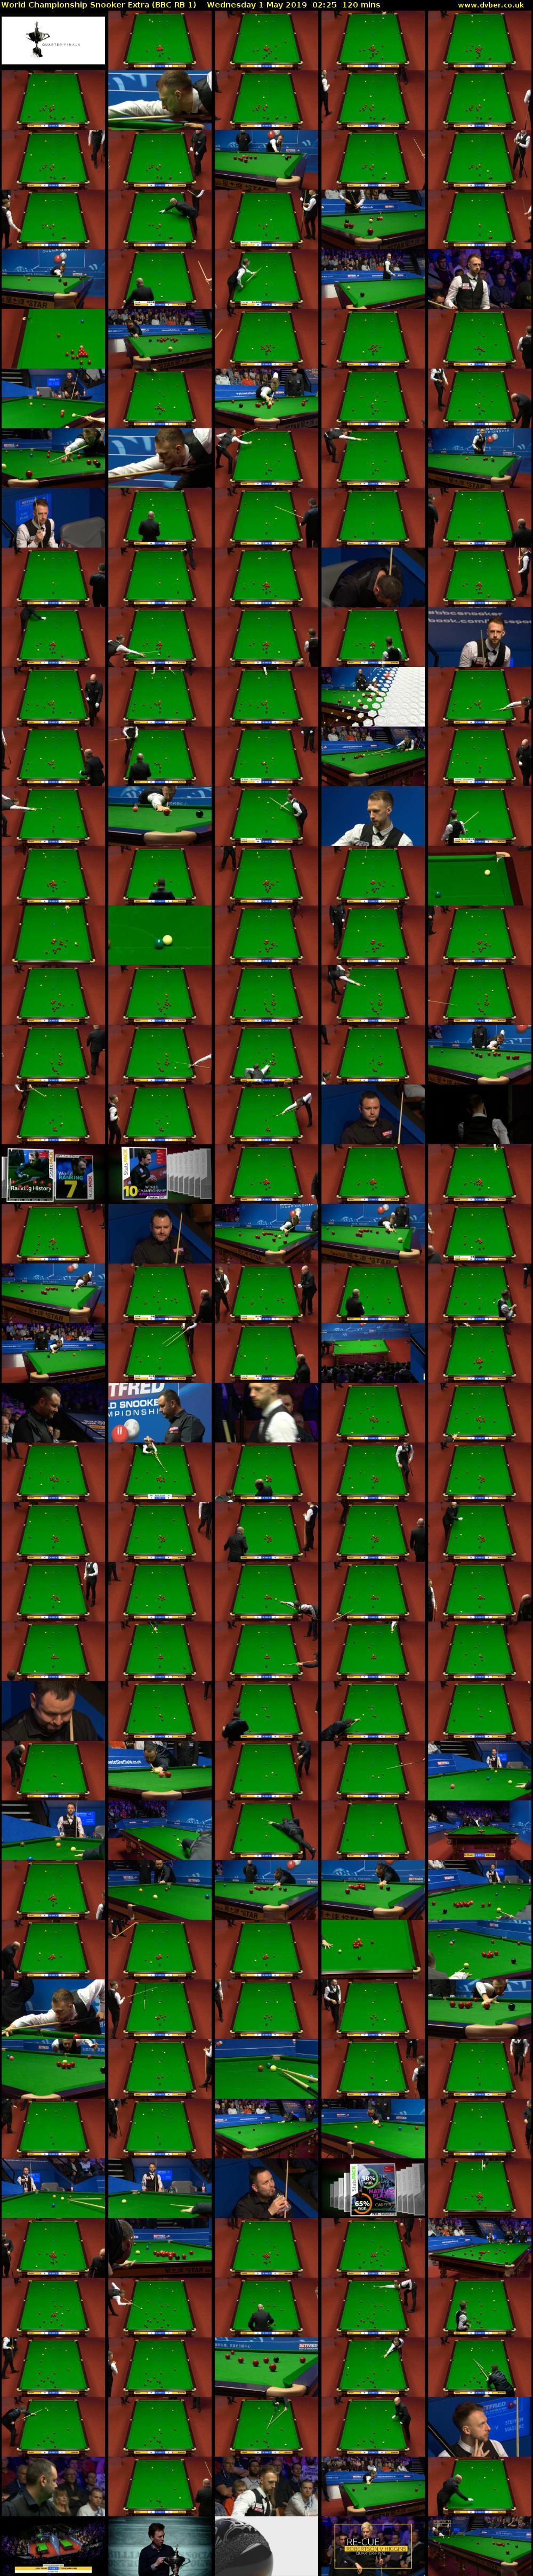 World Championship Snooker Extra (BBC RB 1) Wednesday 1 May 2019 02:25 - 04:25